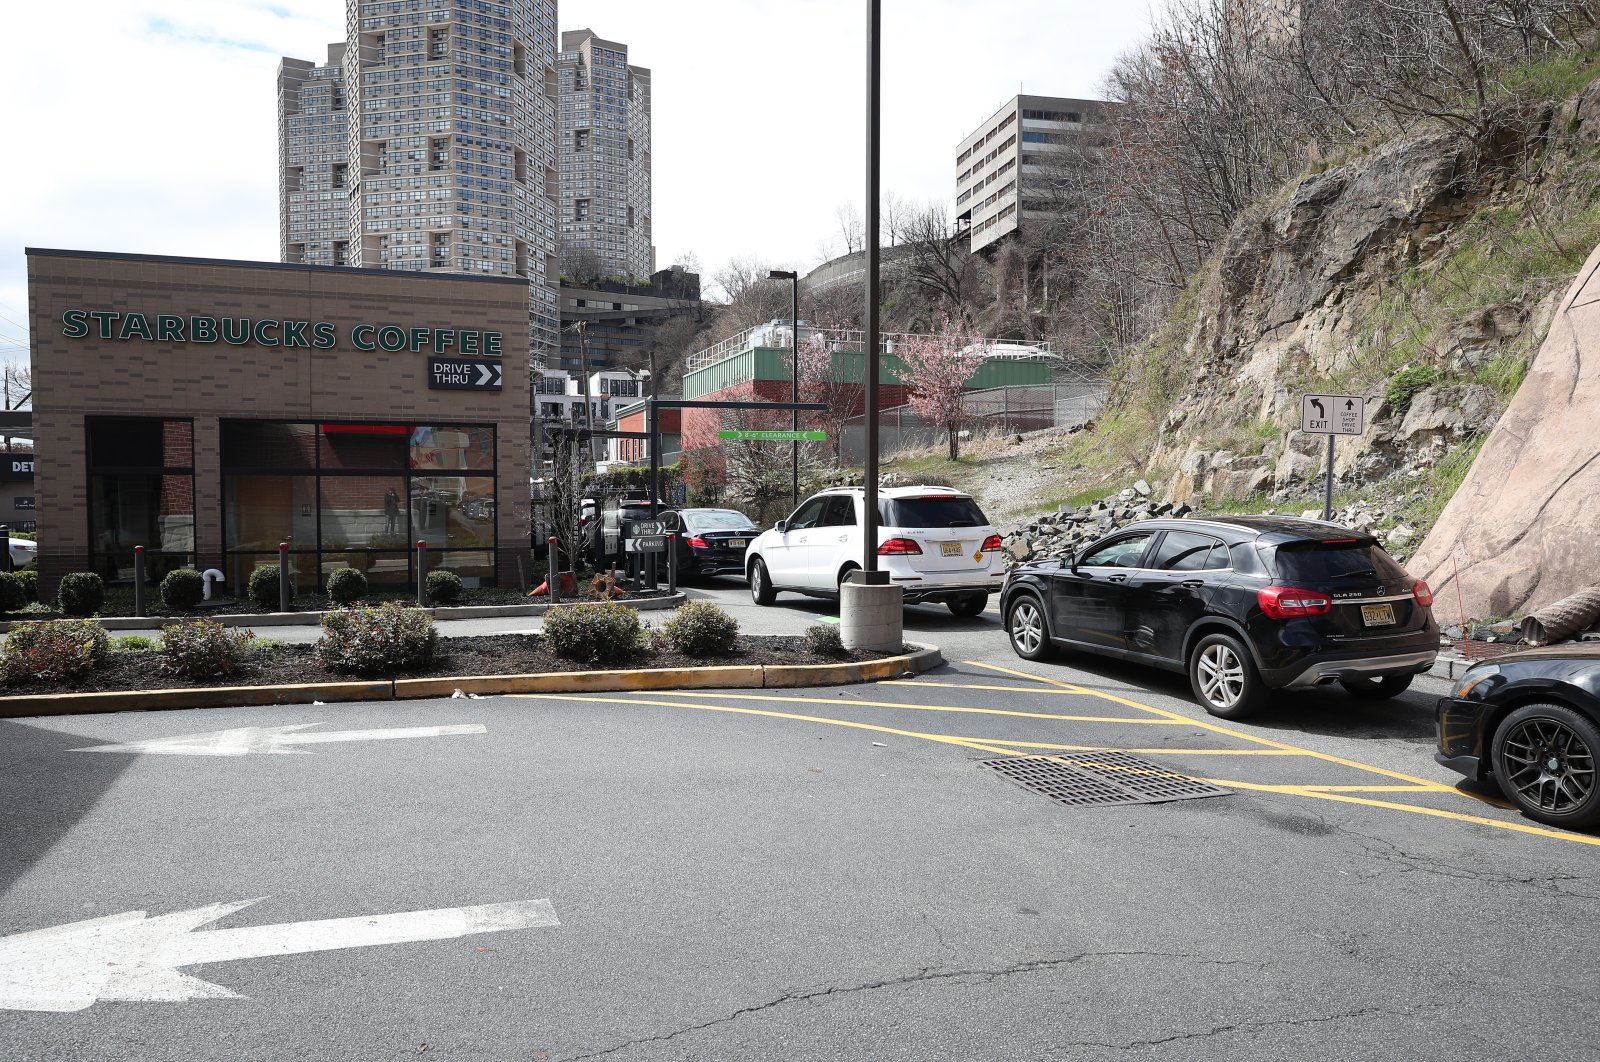 People waiting in their cars at a Starbucks drive-thru in New Jersey, U.S., April 8, 2020. (AA Photo)